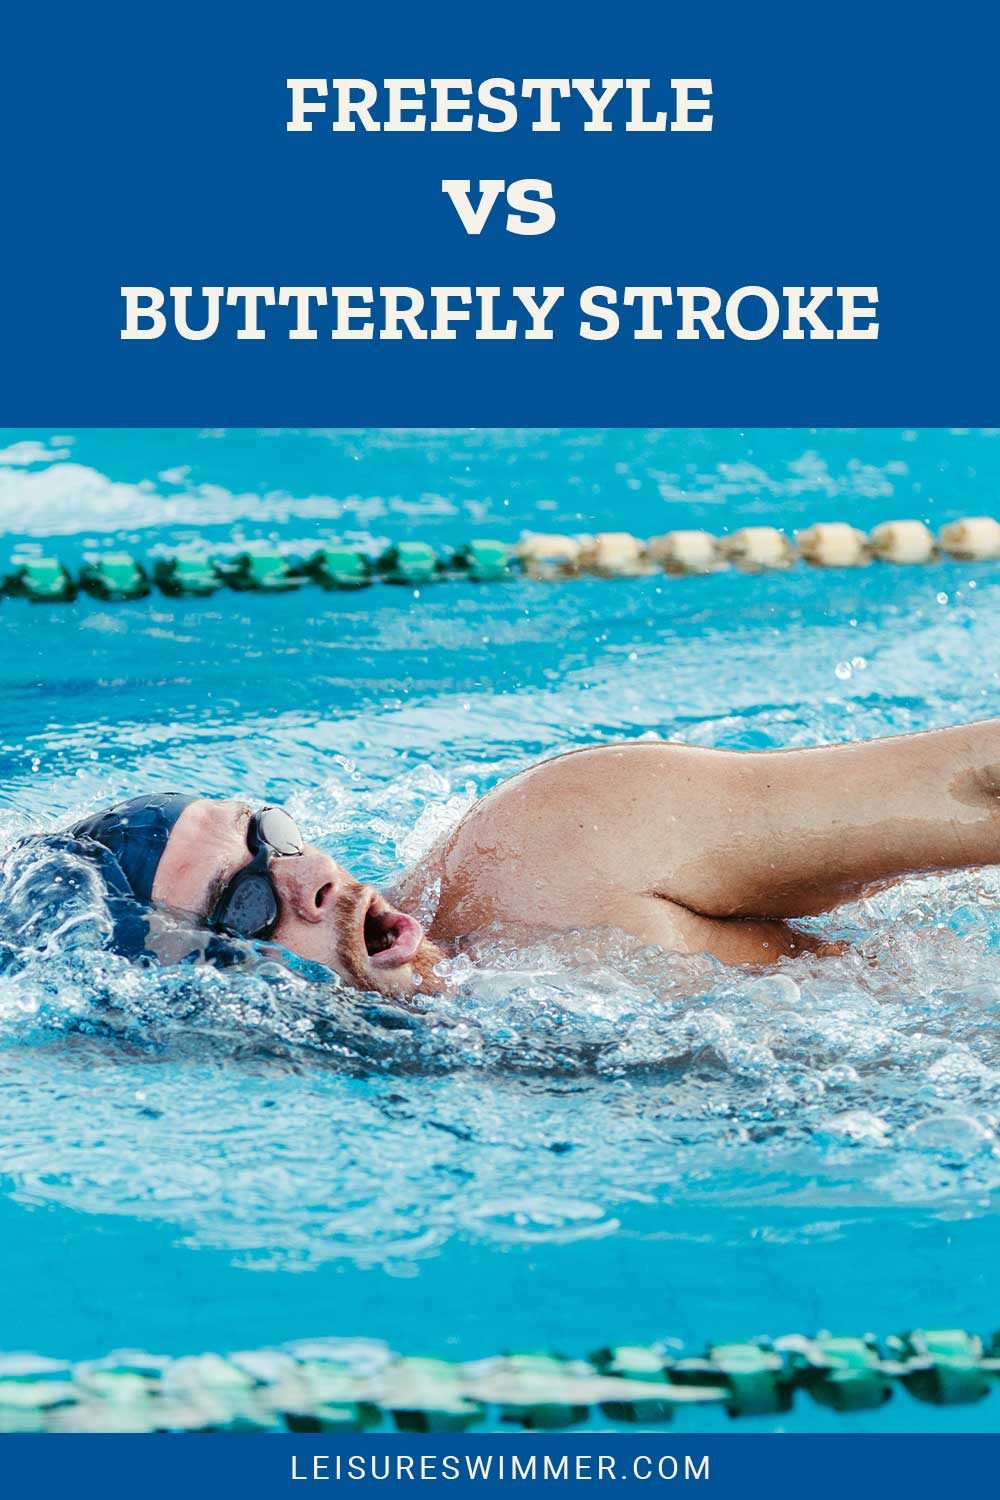 Man's mouth open when swimming in a pool - Freestyle vs. Butterfly Stroke.